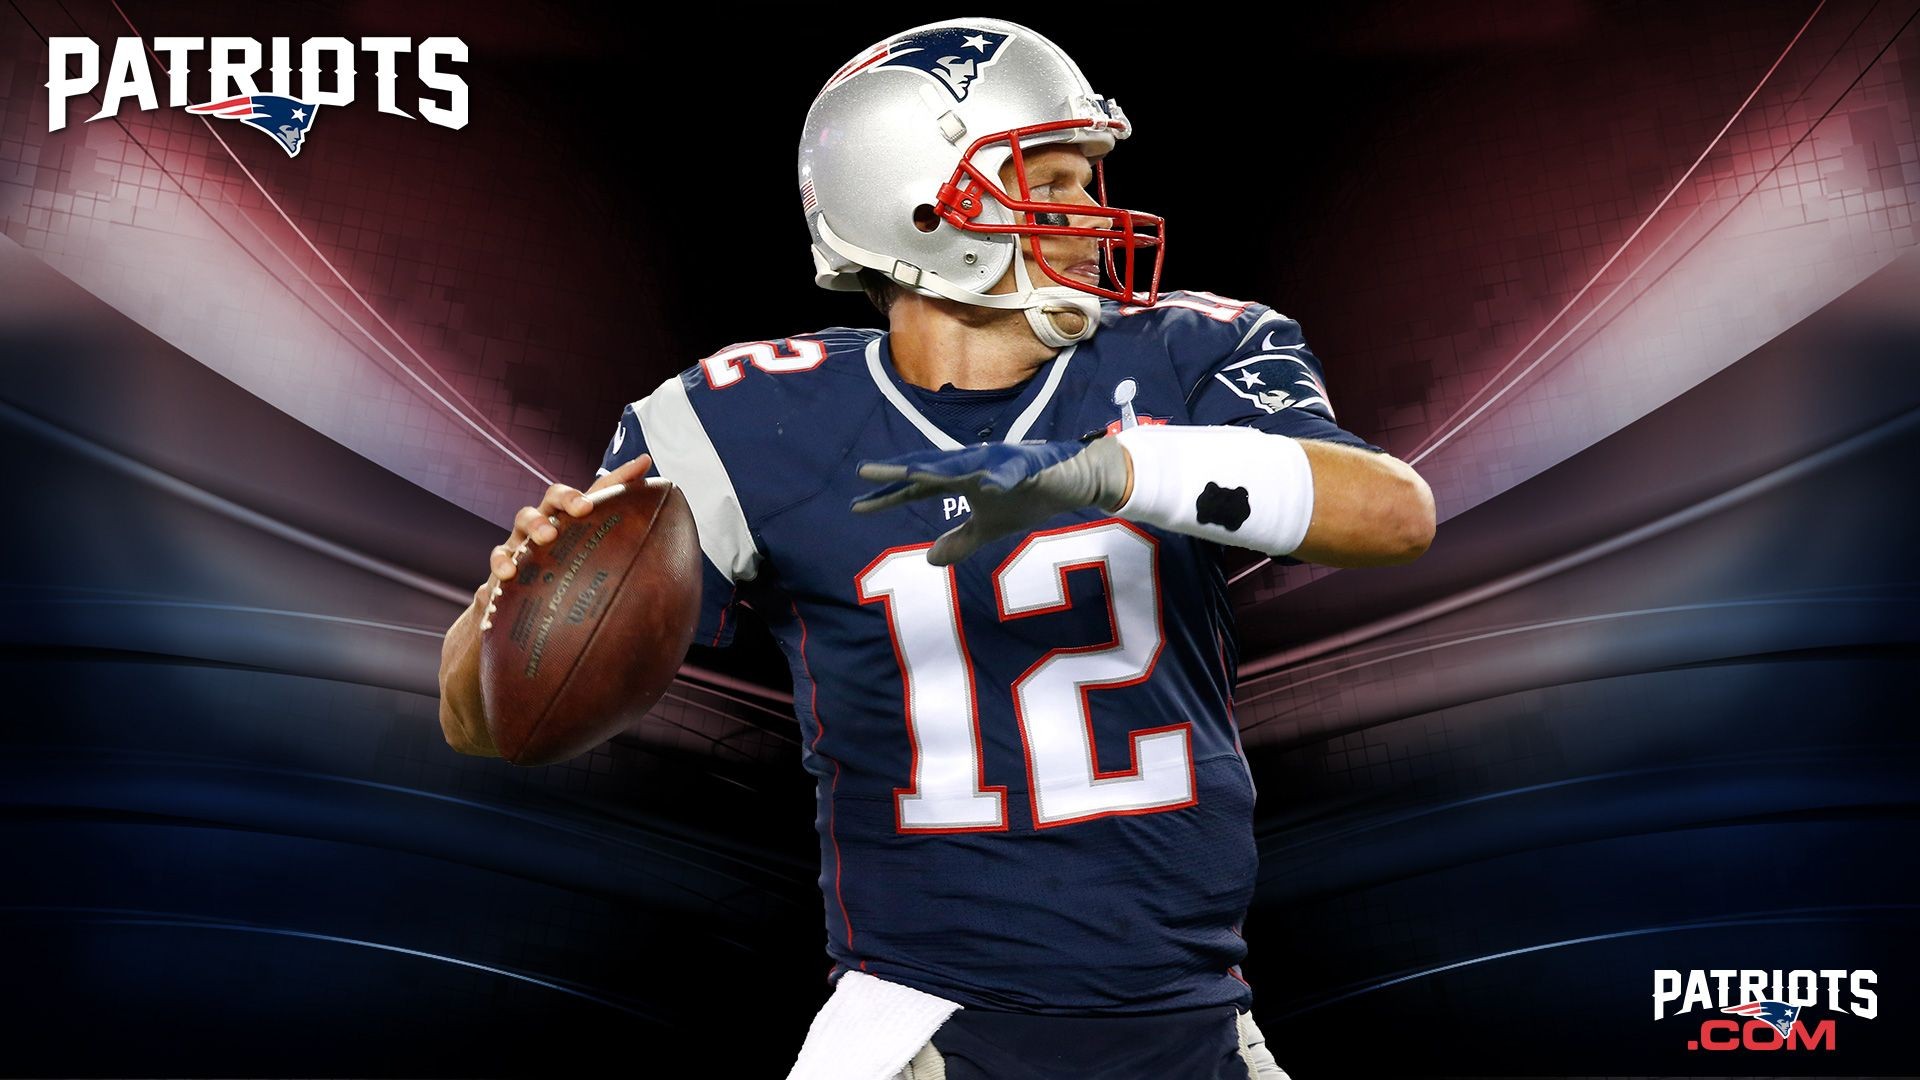 Wallpaper Tom Brady Patriots HD with image resolution 1920x1080 pixel. You can make this wallpaper for your Desktop Computer Backgrounds, Mac Wallpapers, Android Lock screen or iPhone Screensavers